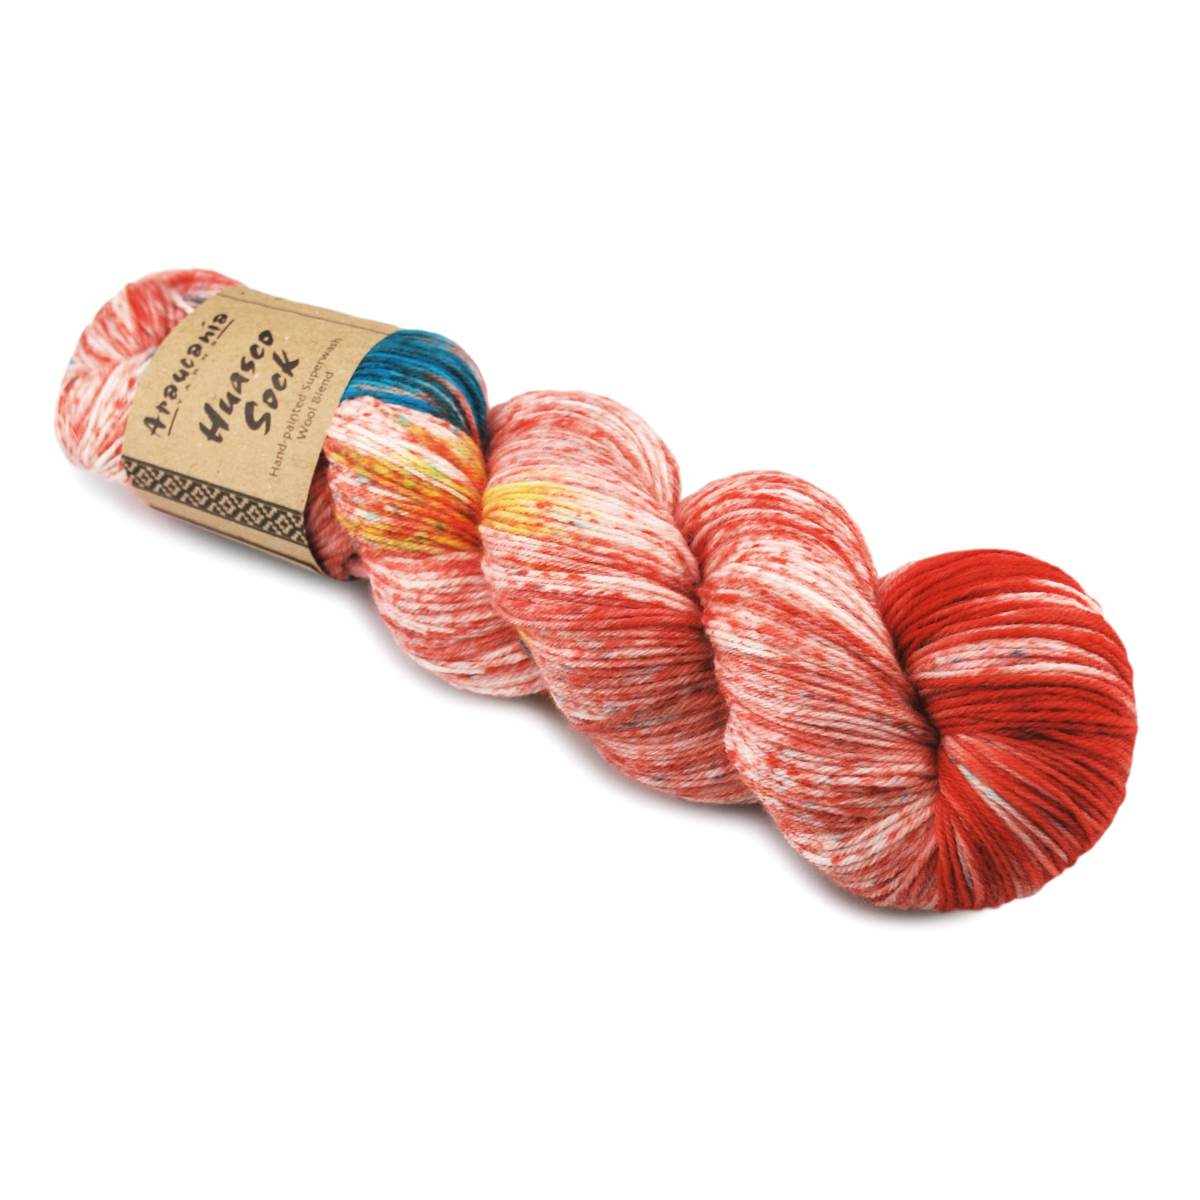 a skein of Huasco Sock Hand Painted